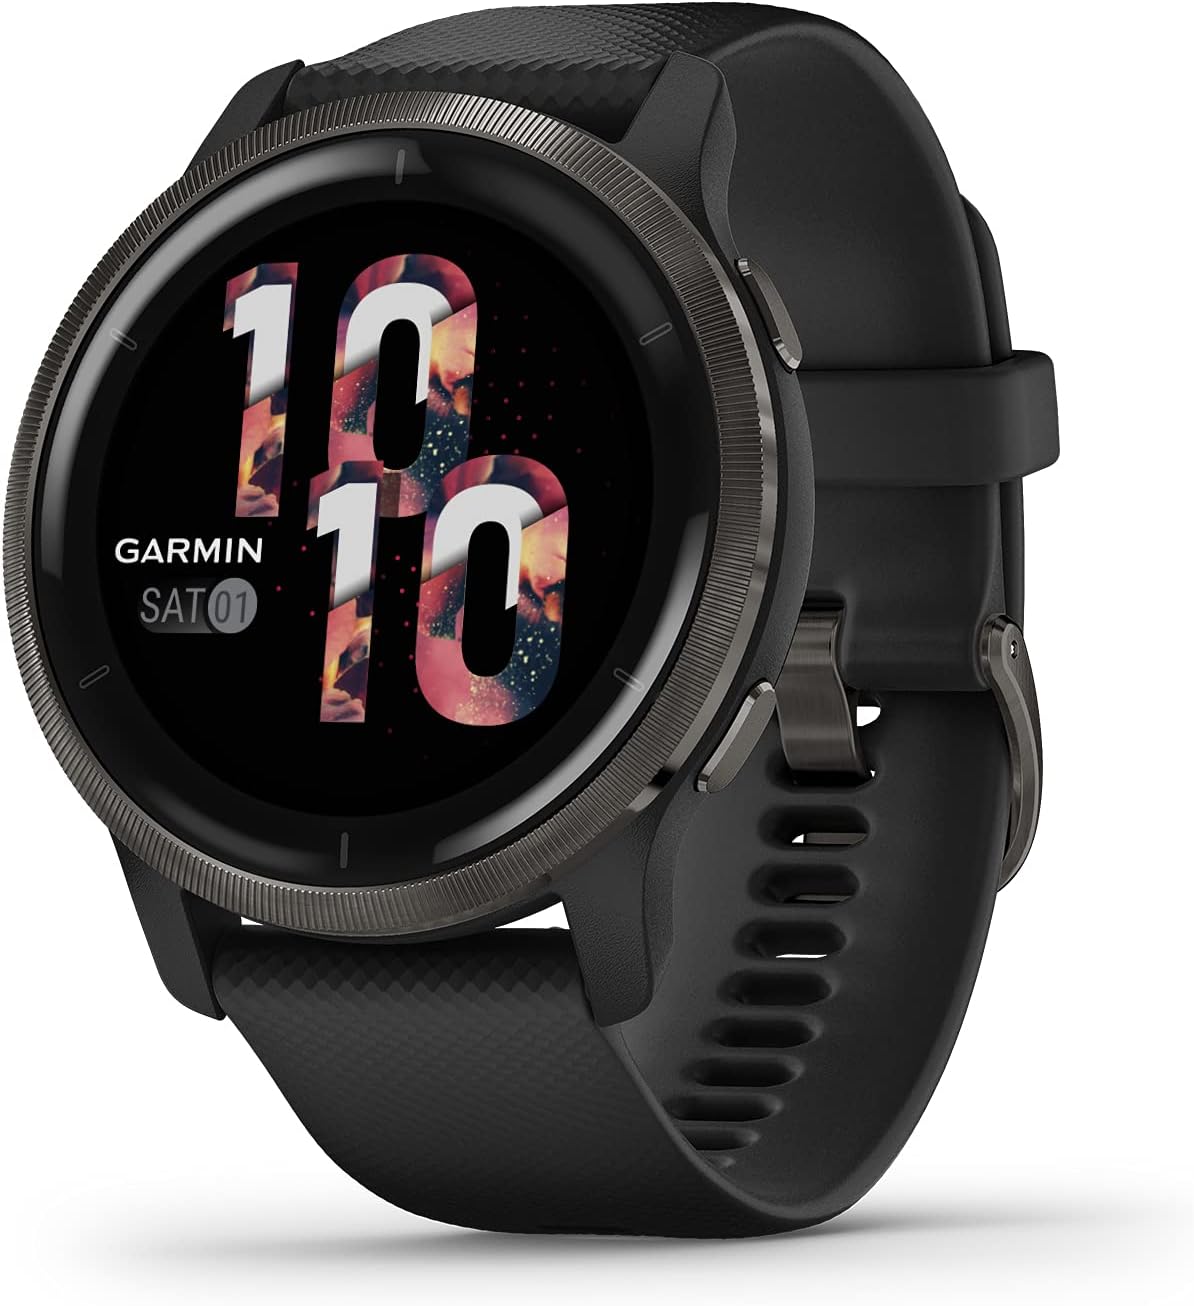 Garmin Venu 2 Review: A Versatile GPS Smartwatch with Advanced Health Monitoring and Fitness Features